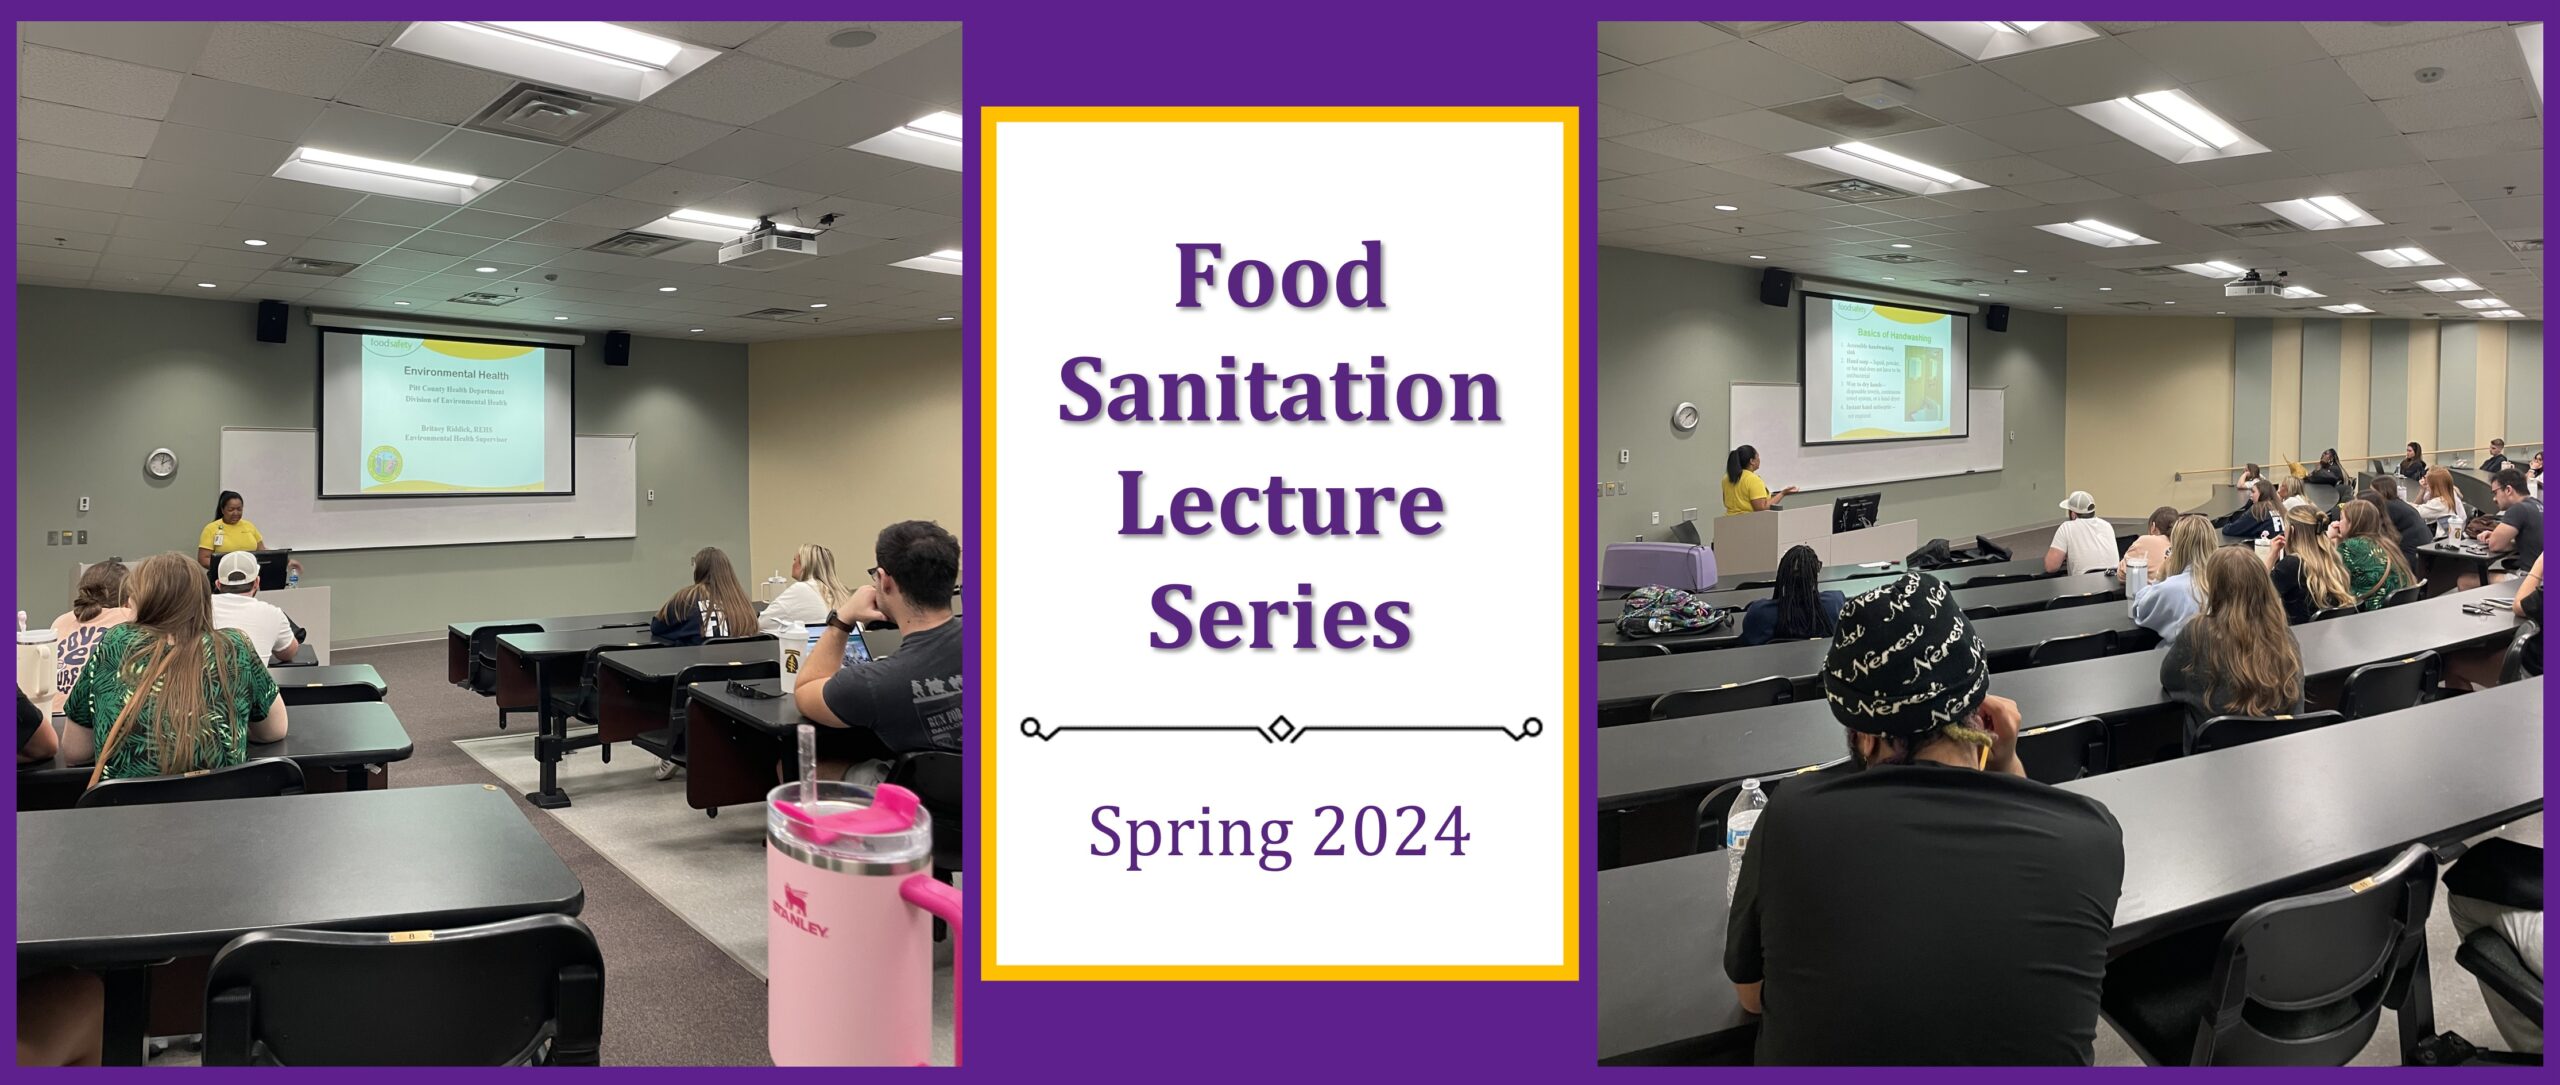 You are currently viewing Food Sanitation Lecture Series, Spring 2024: Ms. Riddick as Guest Speaker